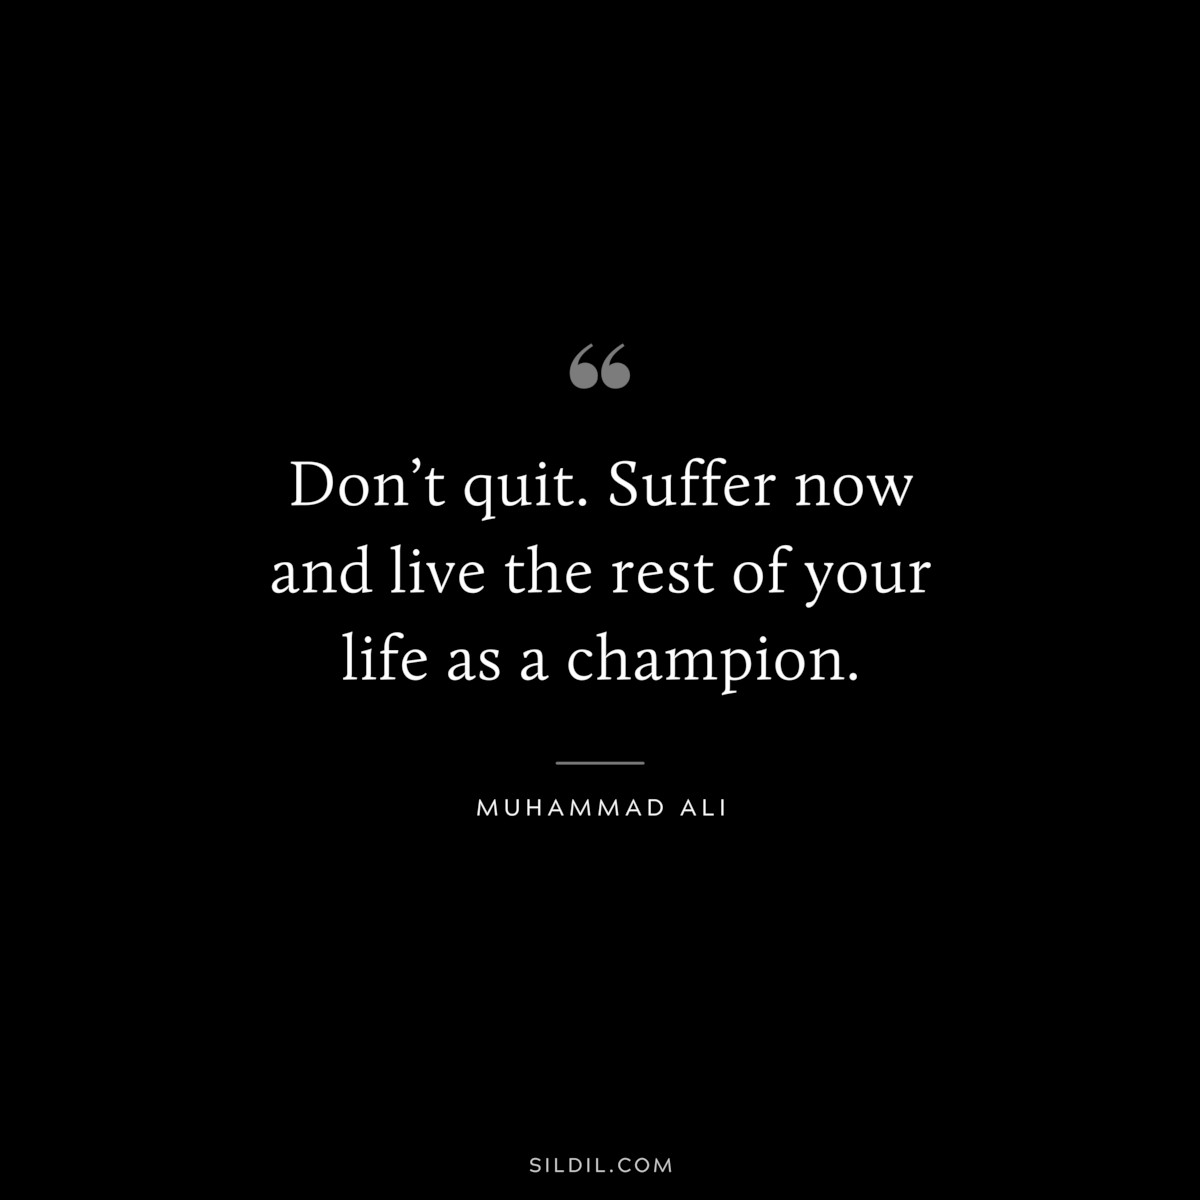 Don’t quit. Suffer now and live the rest of your life as a champion. ― Muhammad Ali